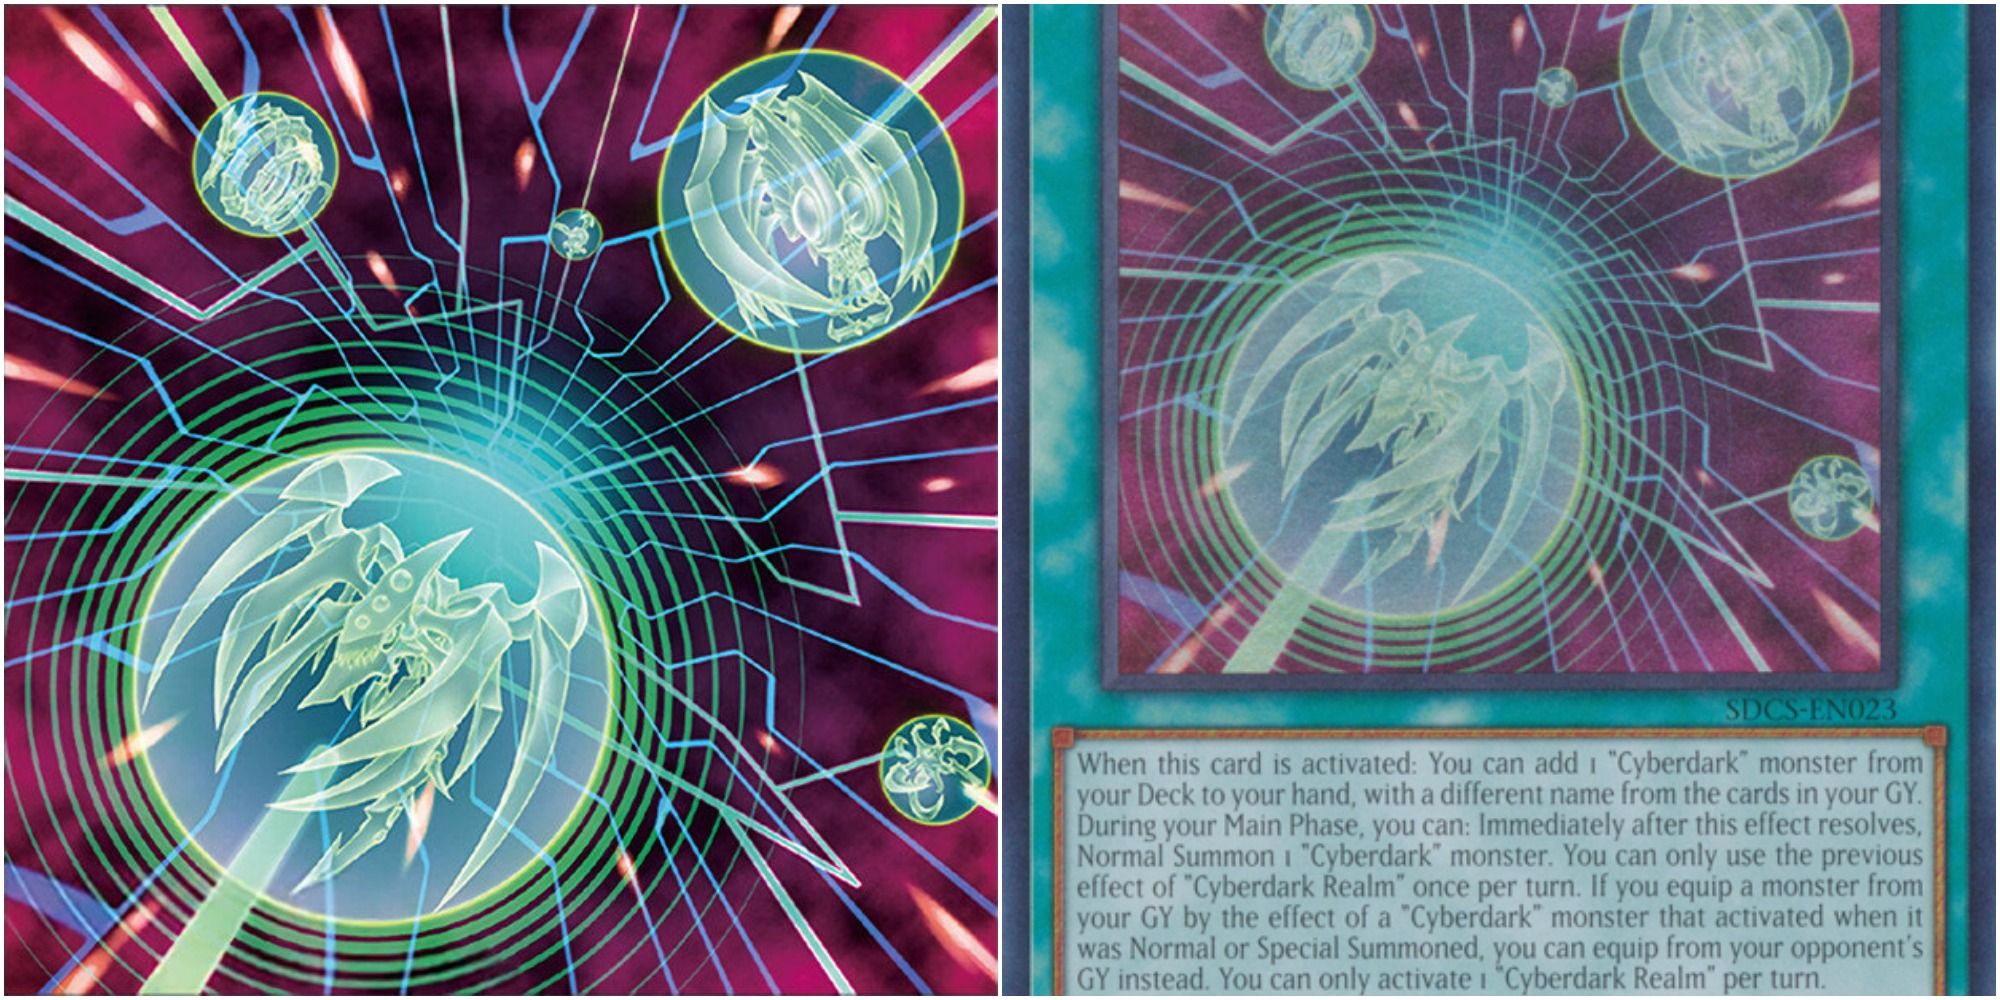 yugioh Cyberdark Realm card art and text